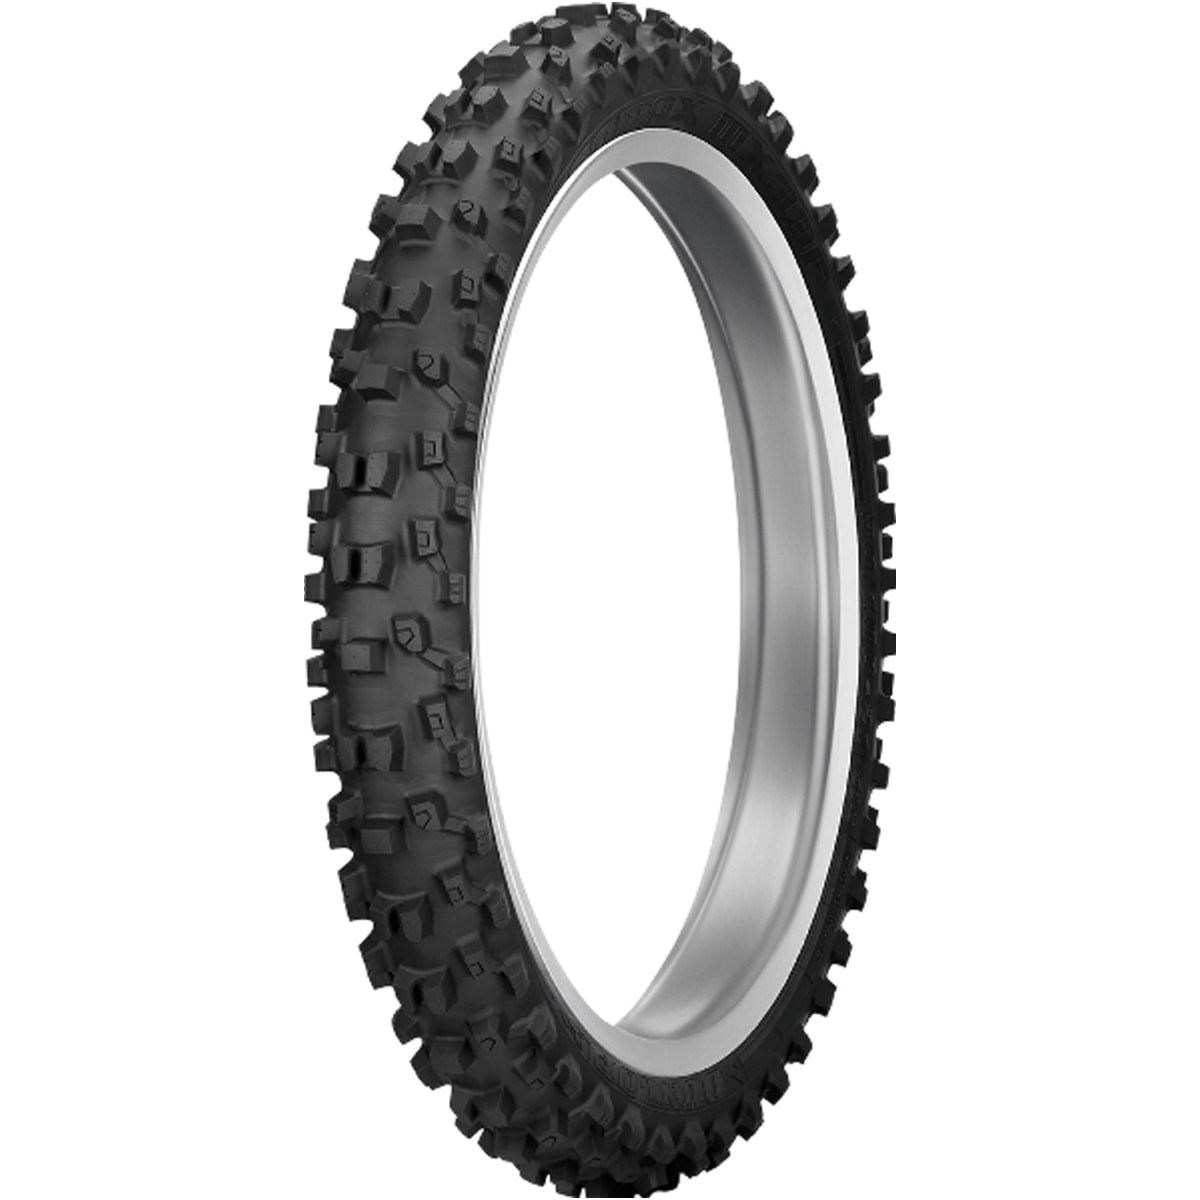 Dunlop Geomax MX33 10" Front Off-Road Tires-0312